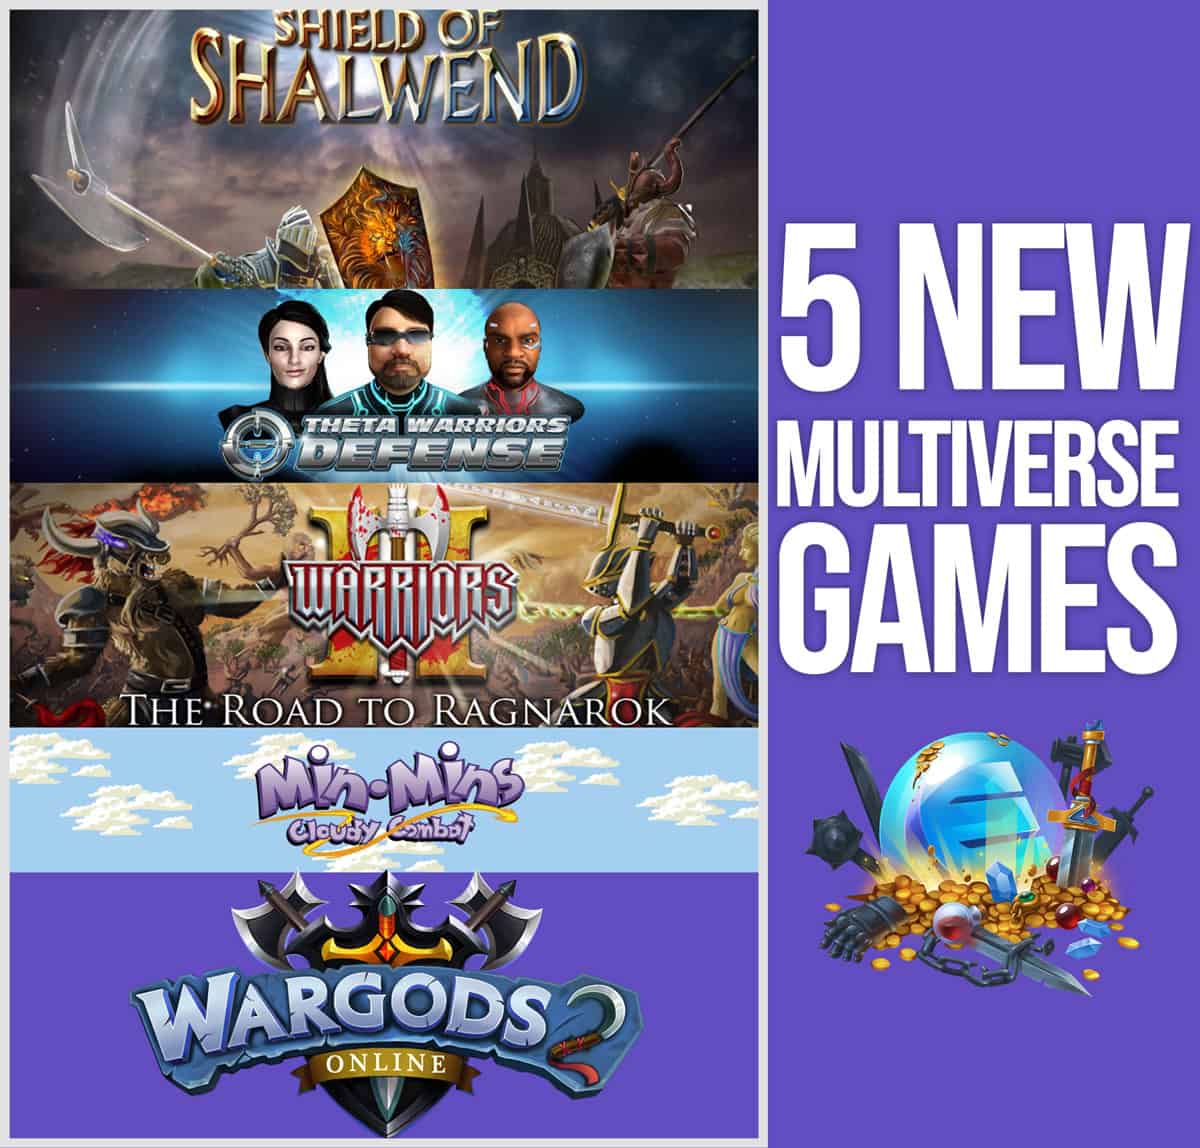 enigma games multiverse enjin egamers blockchain games crypto games An amazing day for the Multiverse as 5 new games by Enigma Games are joining the innovative alliance powered by Enjin Coin.